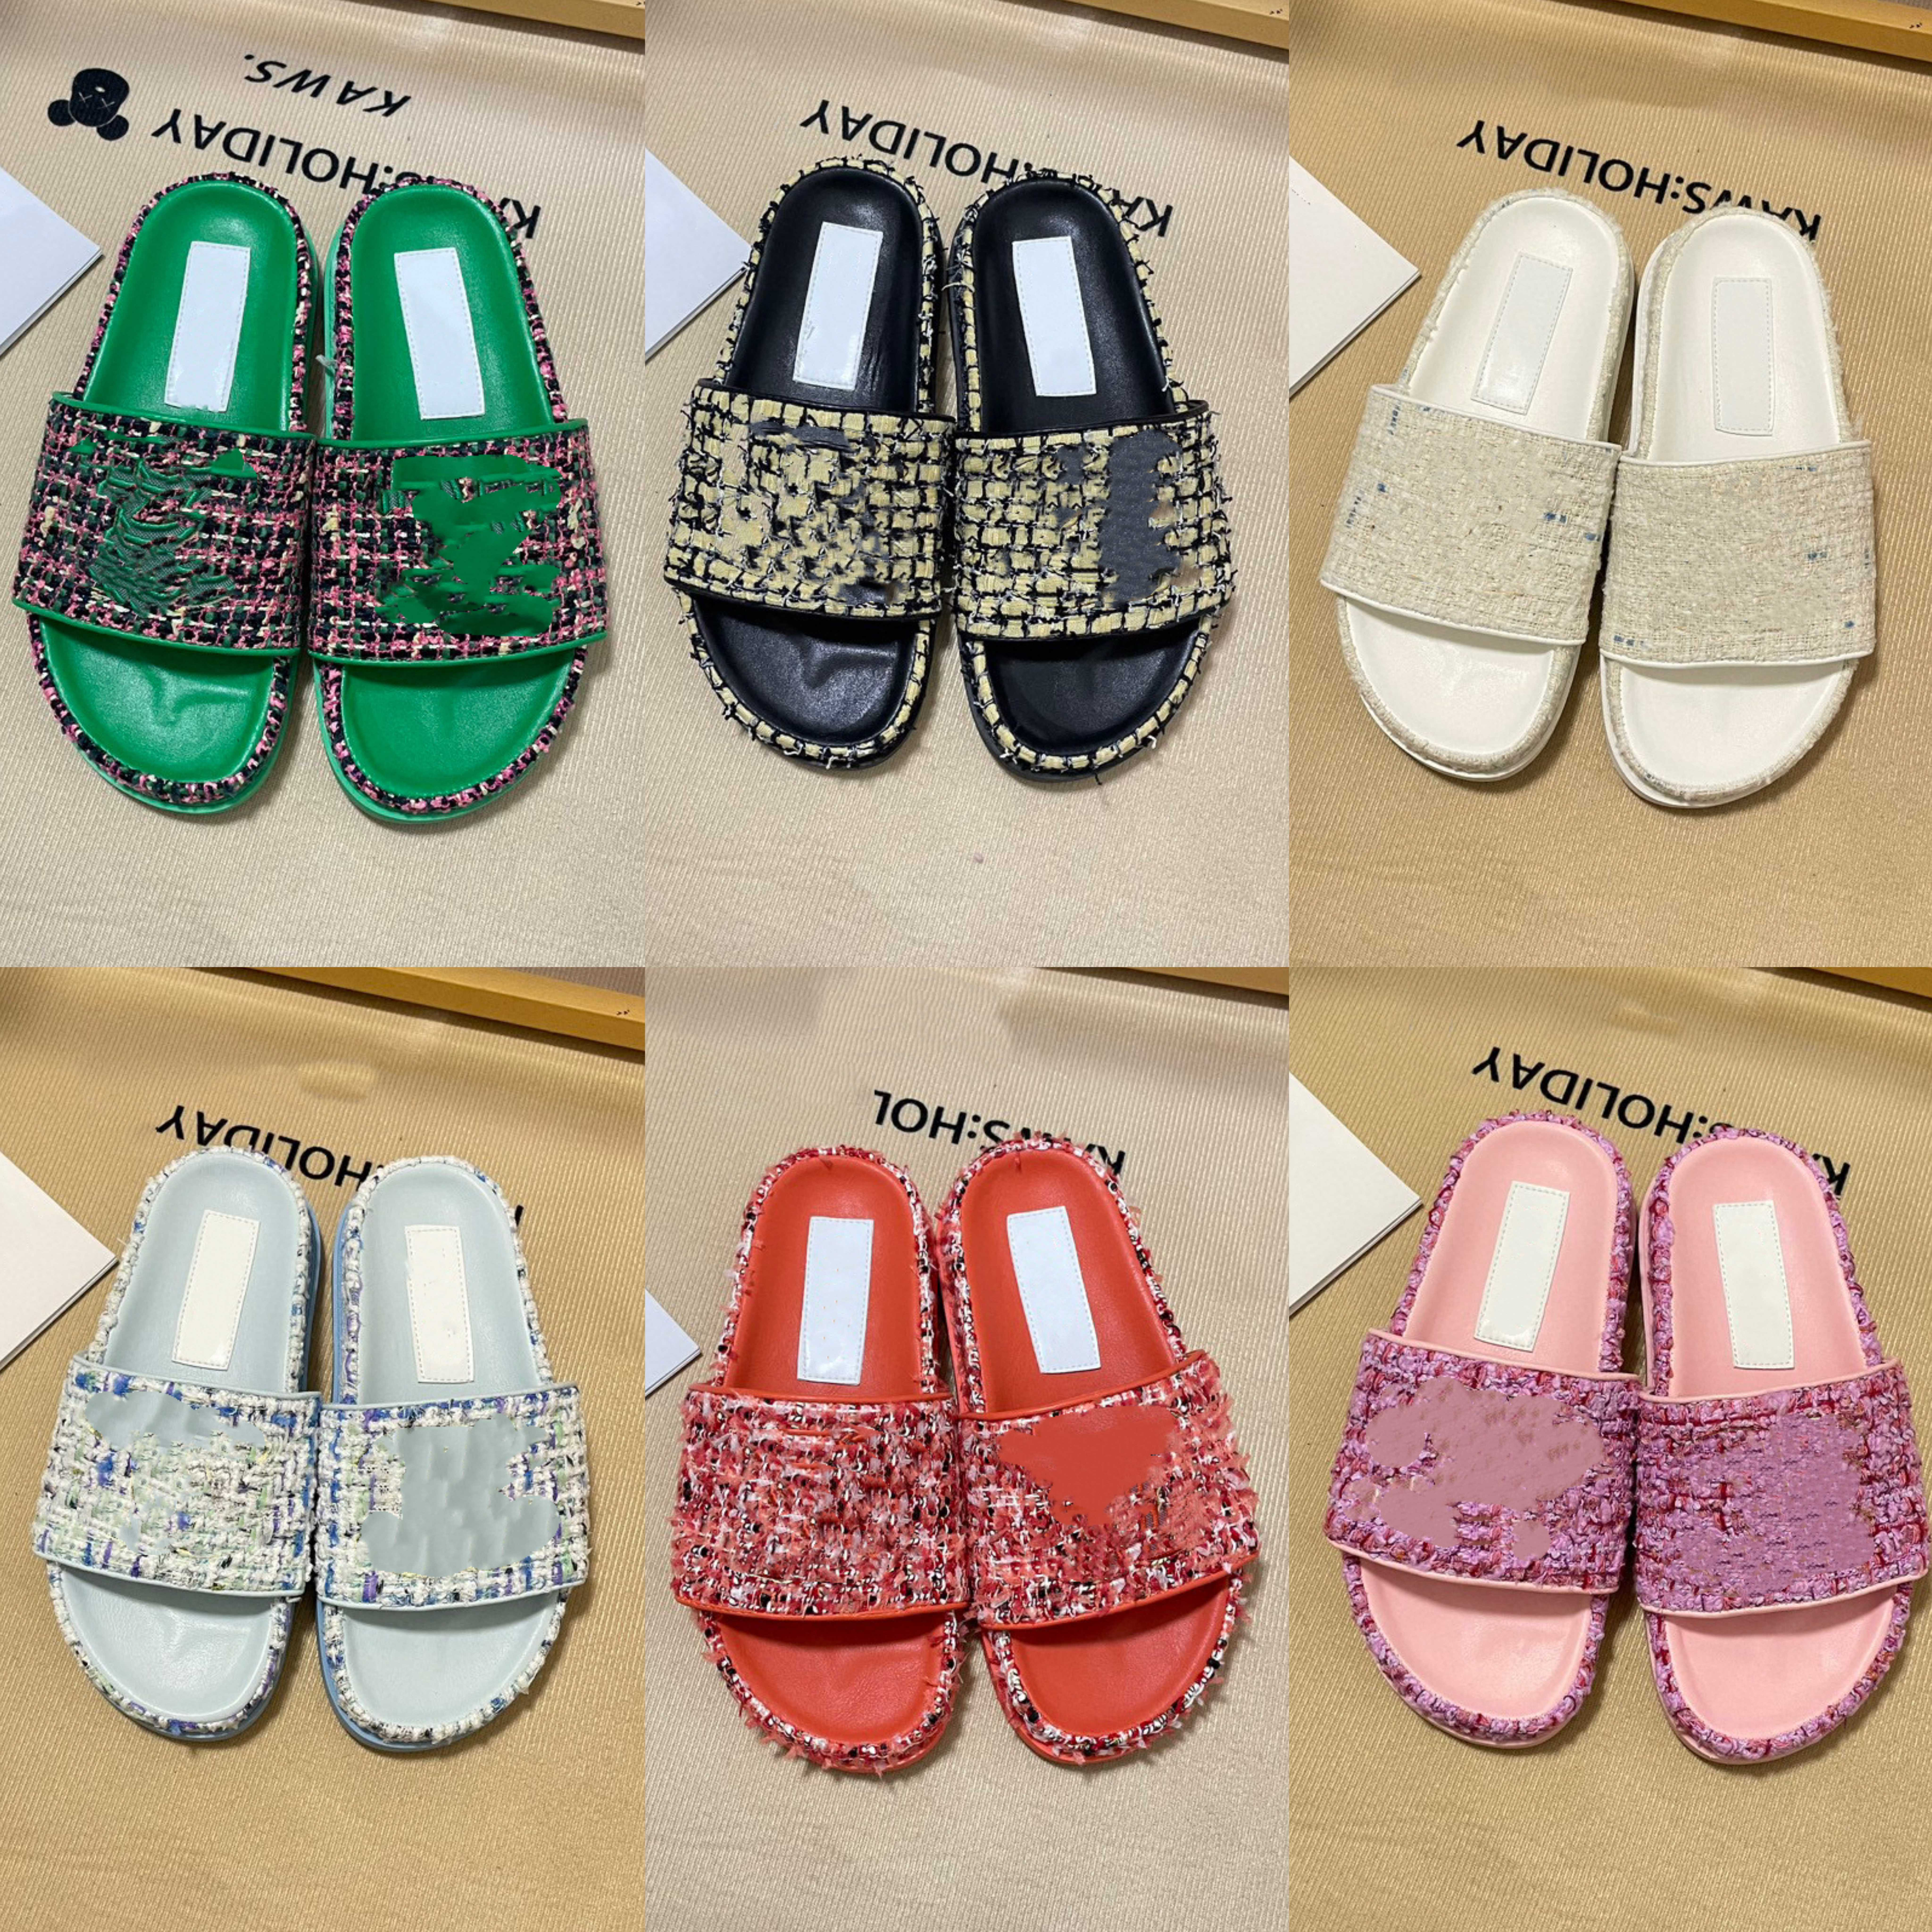 

New Slippers Hoof Heightening Middle Heel Height Fashion Color Matching Decorative Pattern Lazy Beach Cool Outdoor Women's Summer Shoes Size:35-40, Green